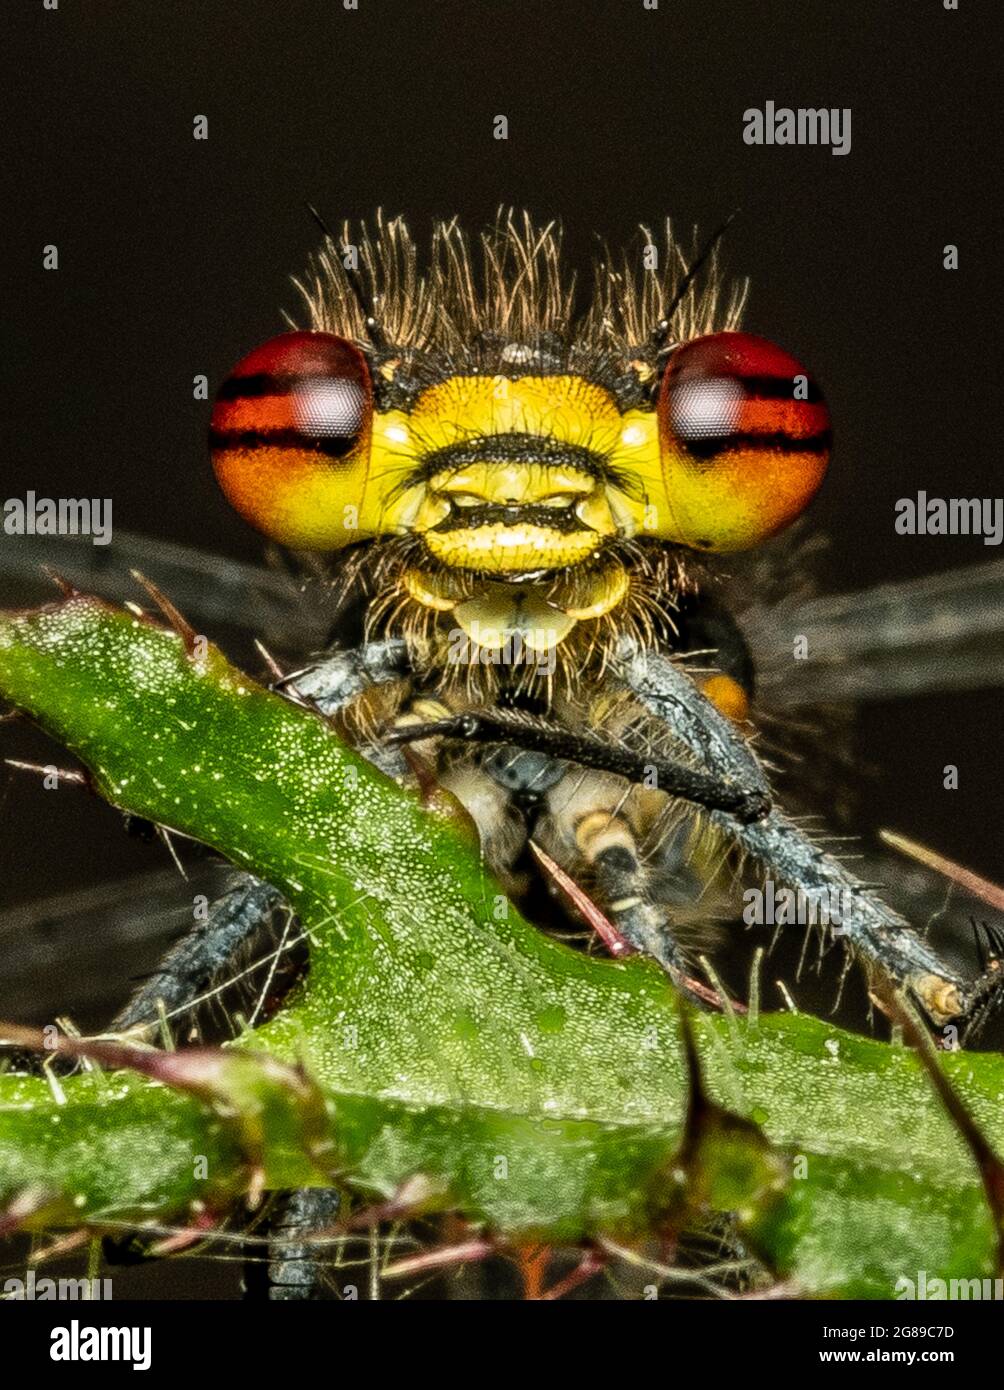 Yeux damselfly. Gros plan. Banque D'Images